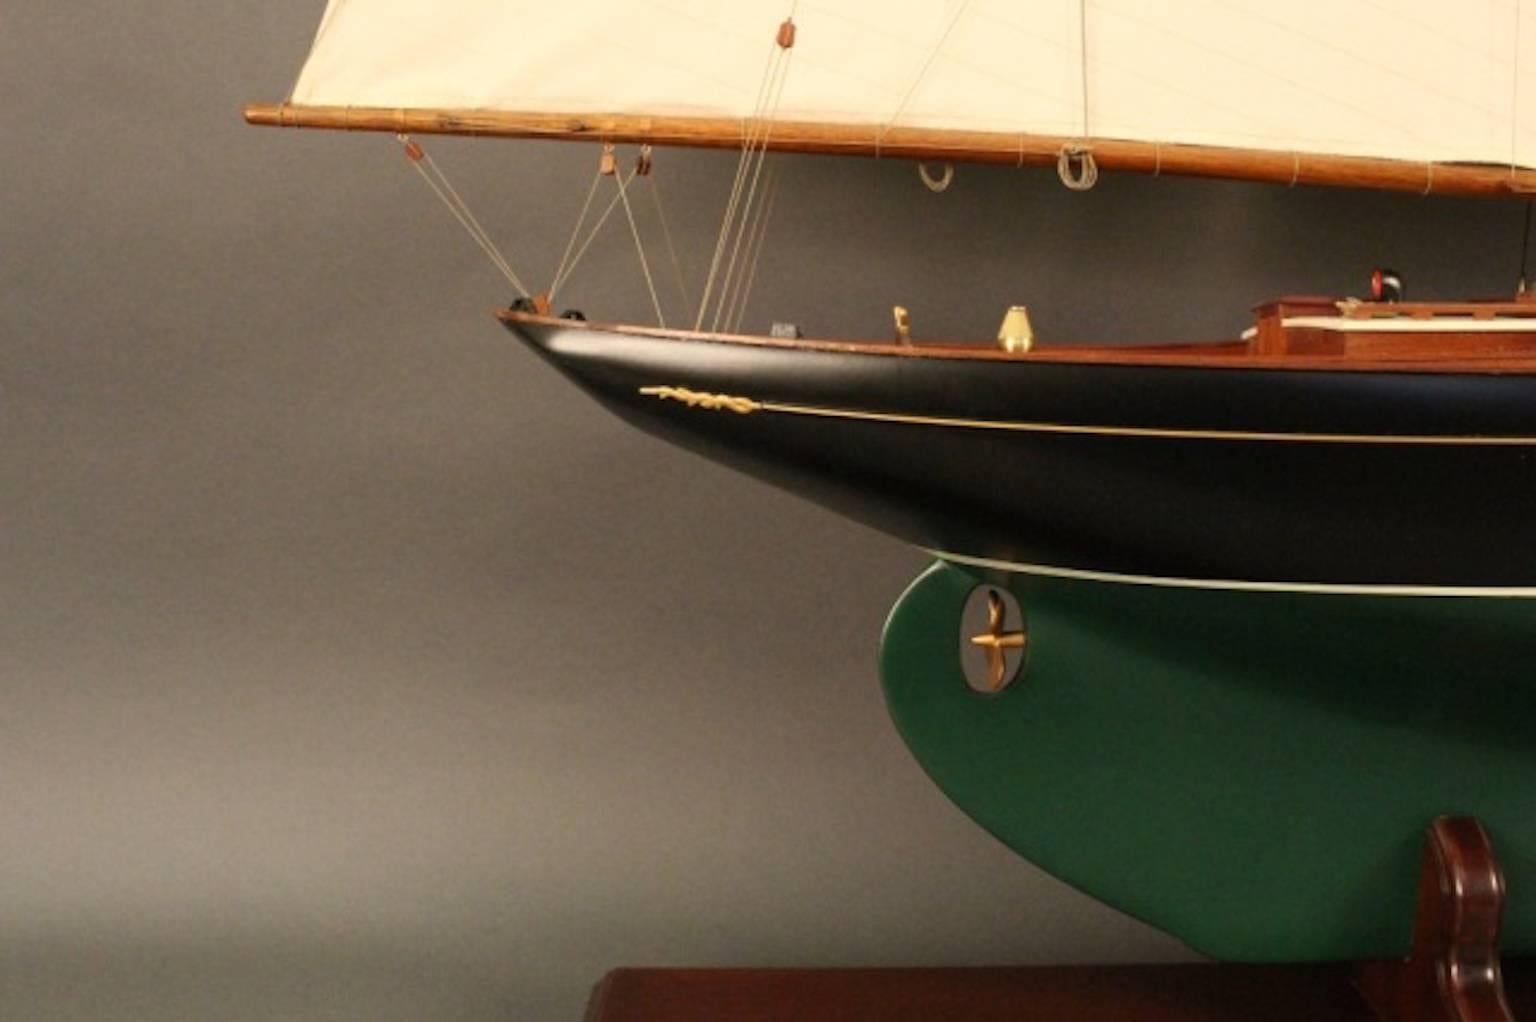 A scale model of the John Alden designed schooner “Malabar X". The planked deck carries a long cabin with oval portholes, toe-rail, skylights, and companionways. Other details include an anchor windlass, stovepipe, anchor, binnacle, and helm,